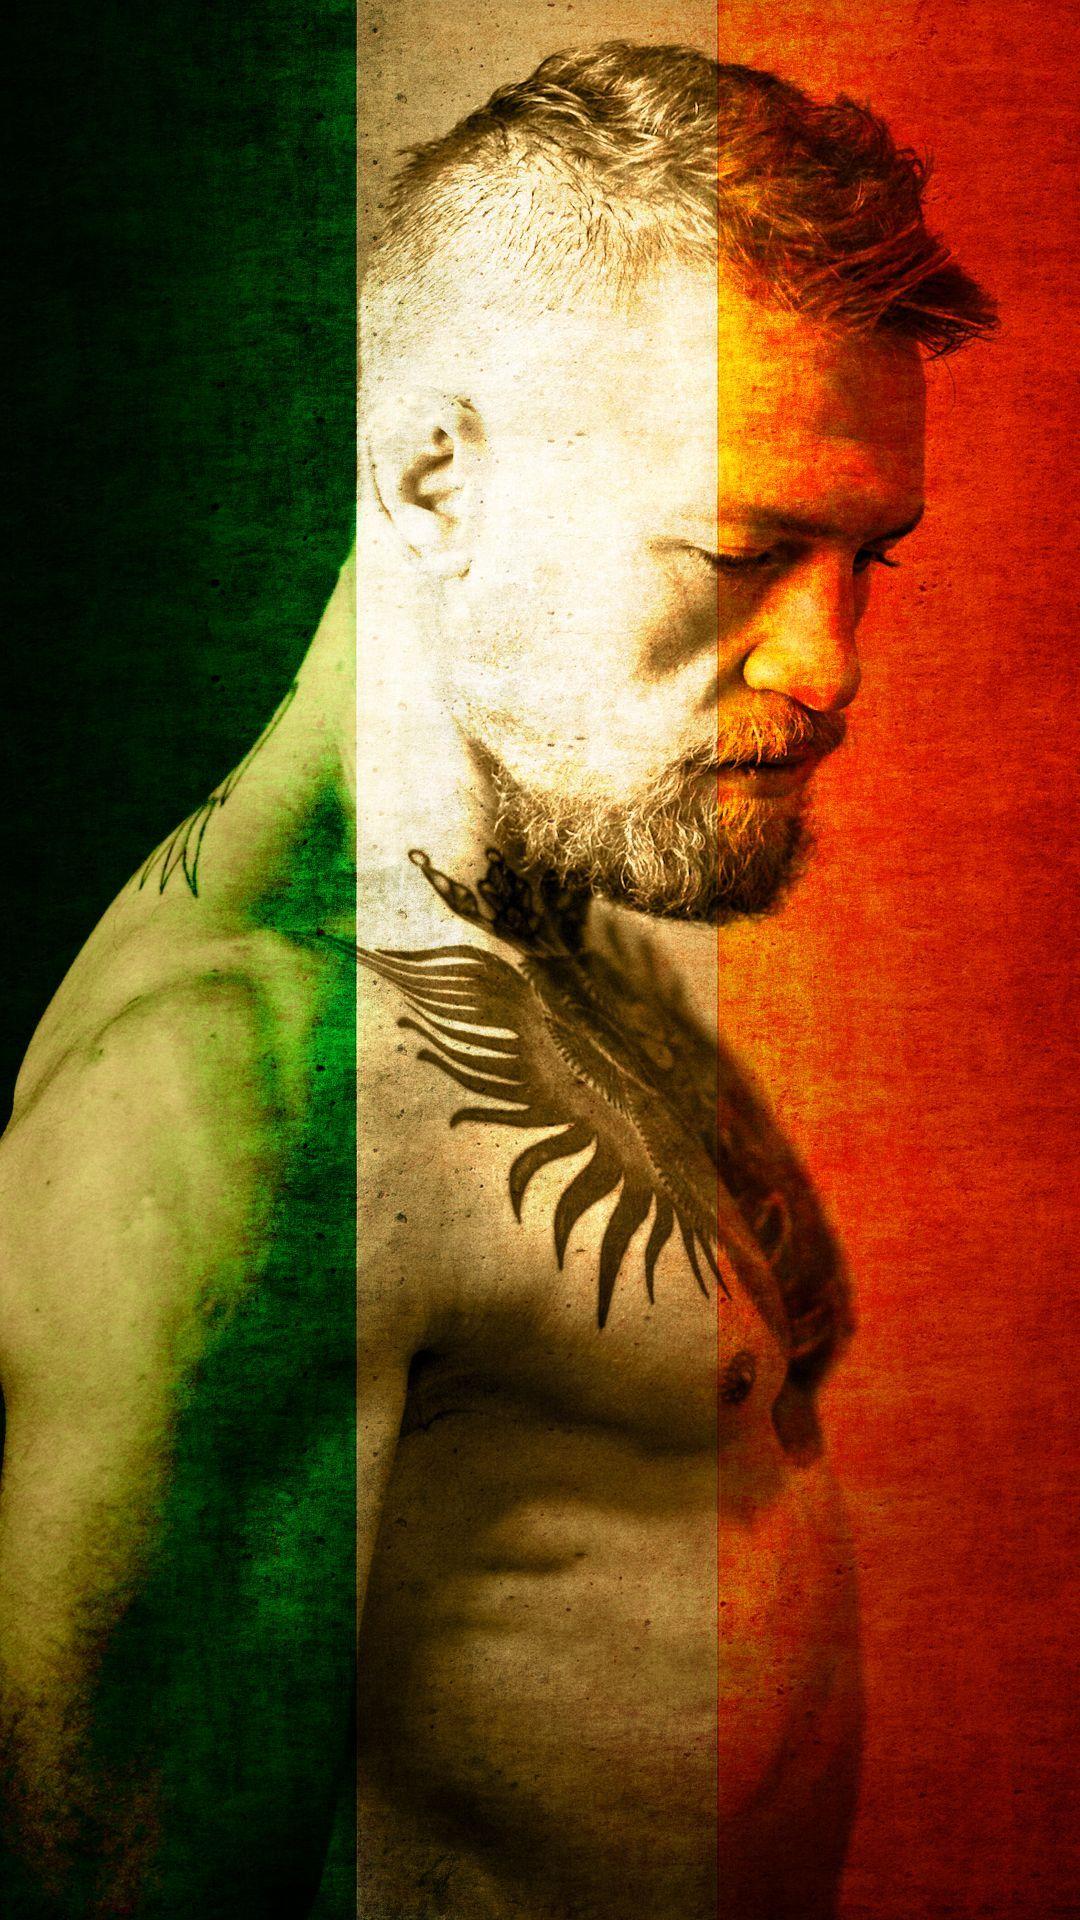 Conor McGregor Wallpaper For iPhone Live Wallpaper HD. Conor mcgregor wallpaper, Conor mcgregor wallpaper hd, Mcgregor wallpaper